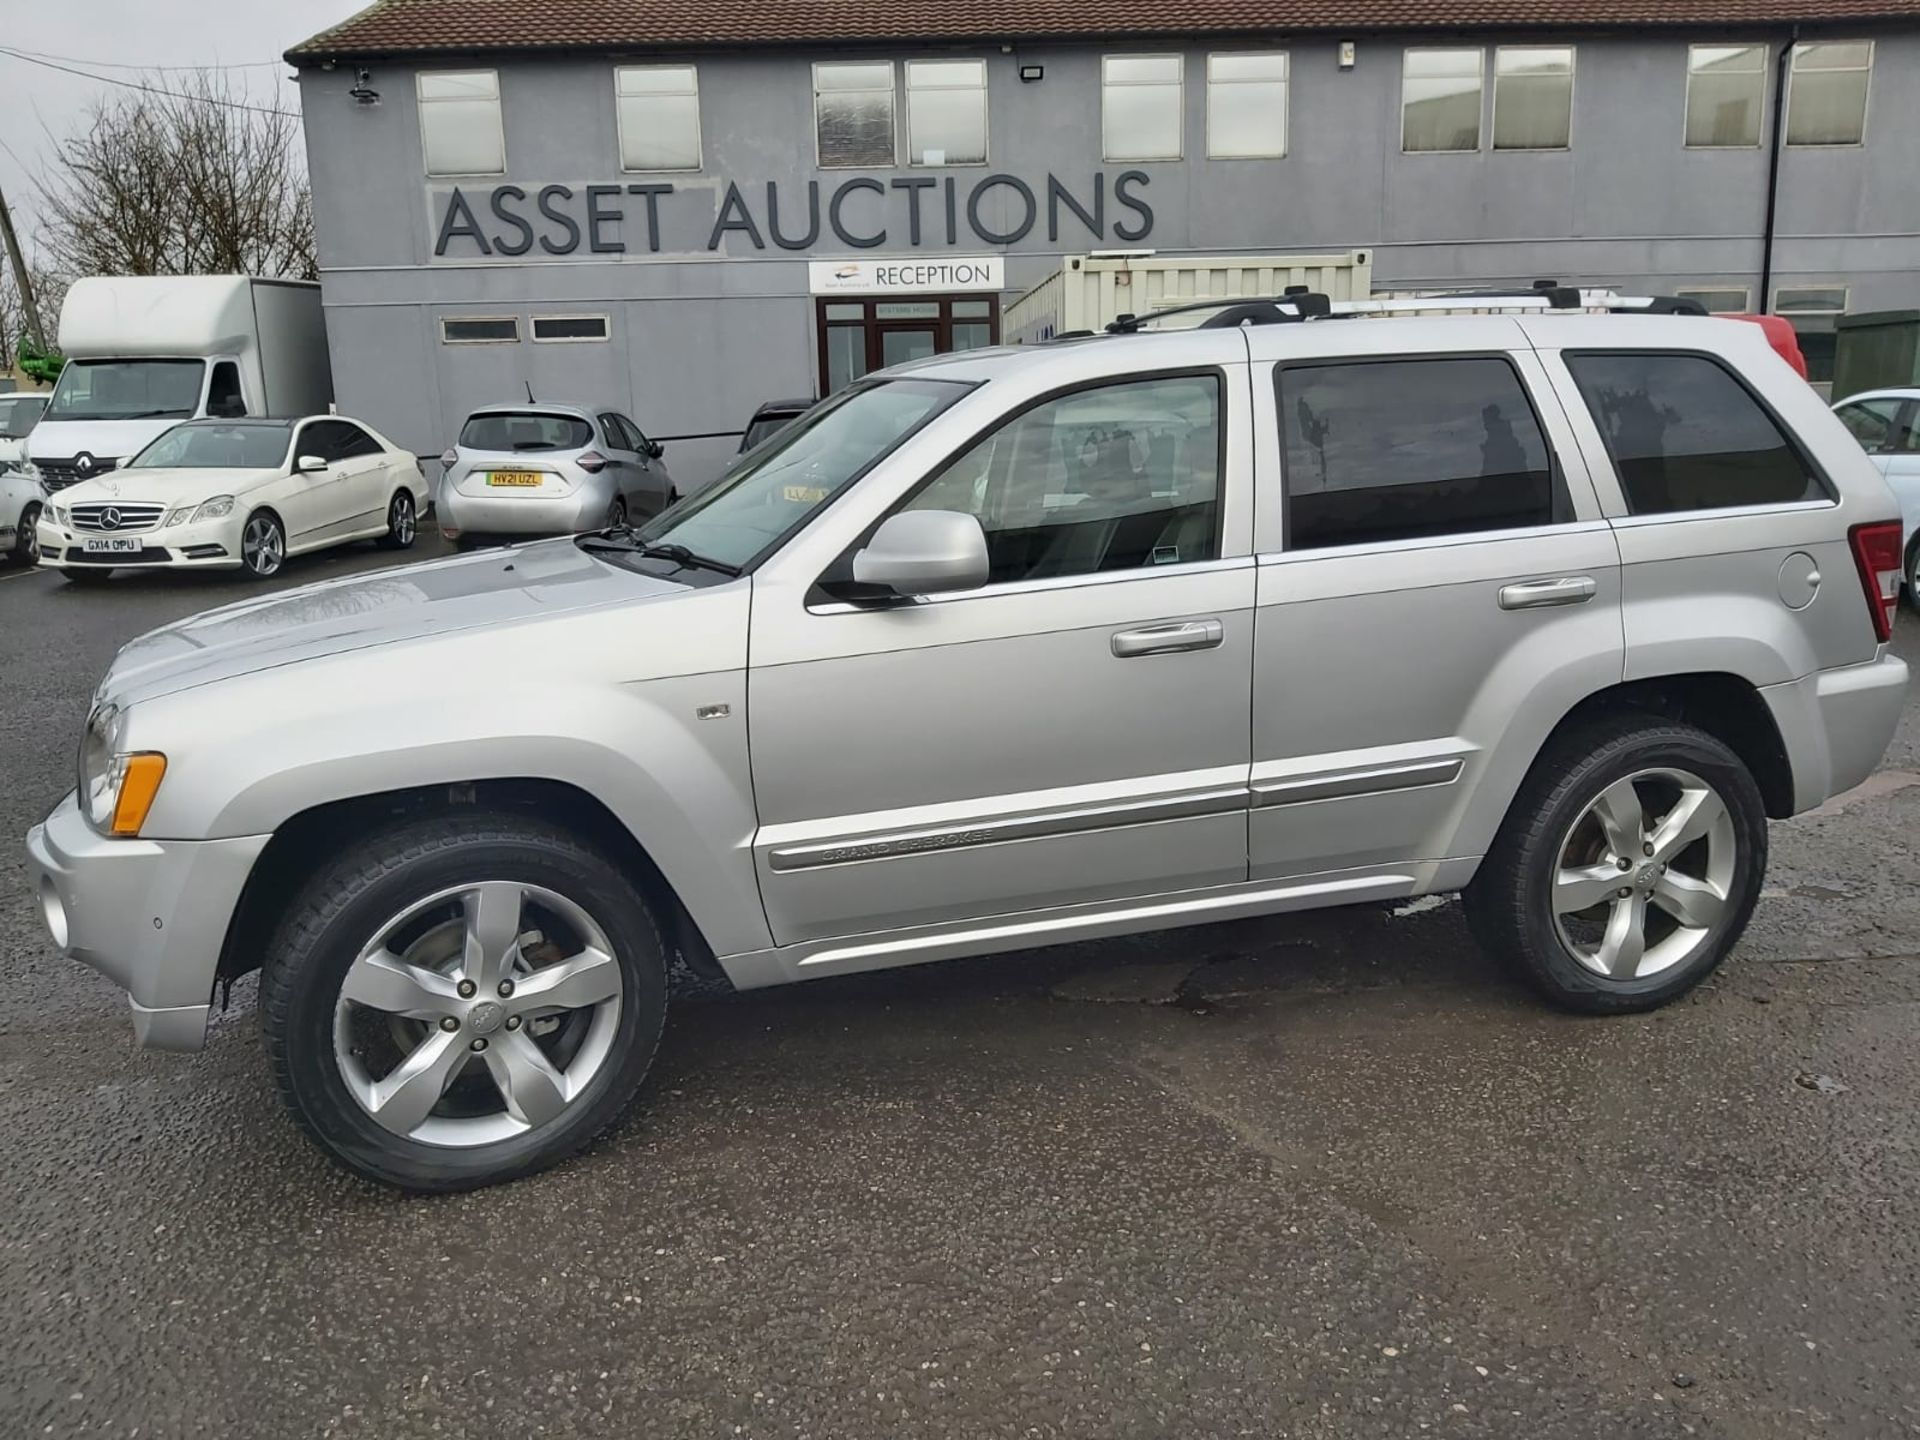 2007 JEEP G-CHEROKEE OVERLAND CRD A SILVER SUV ESTATE *NO VAT* - Image 3 of 17